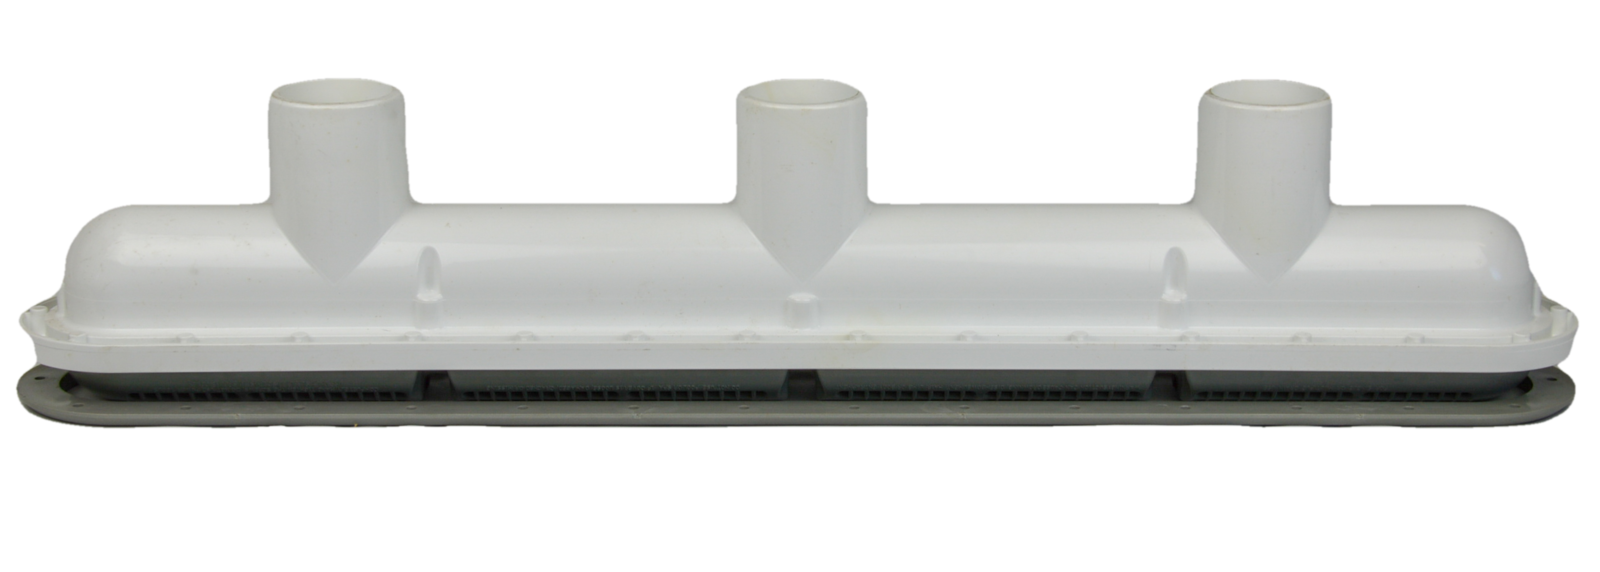 Waterway 32" Ultra Strip Drain / Suction - for Fibreglass & Vinyl lined spas & pools - up to 1330 lpm / 352 gpm